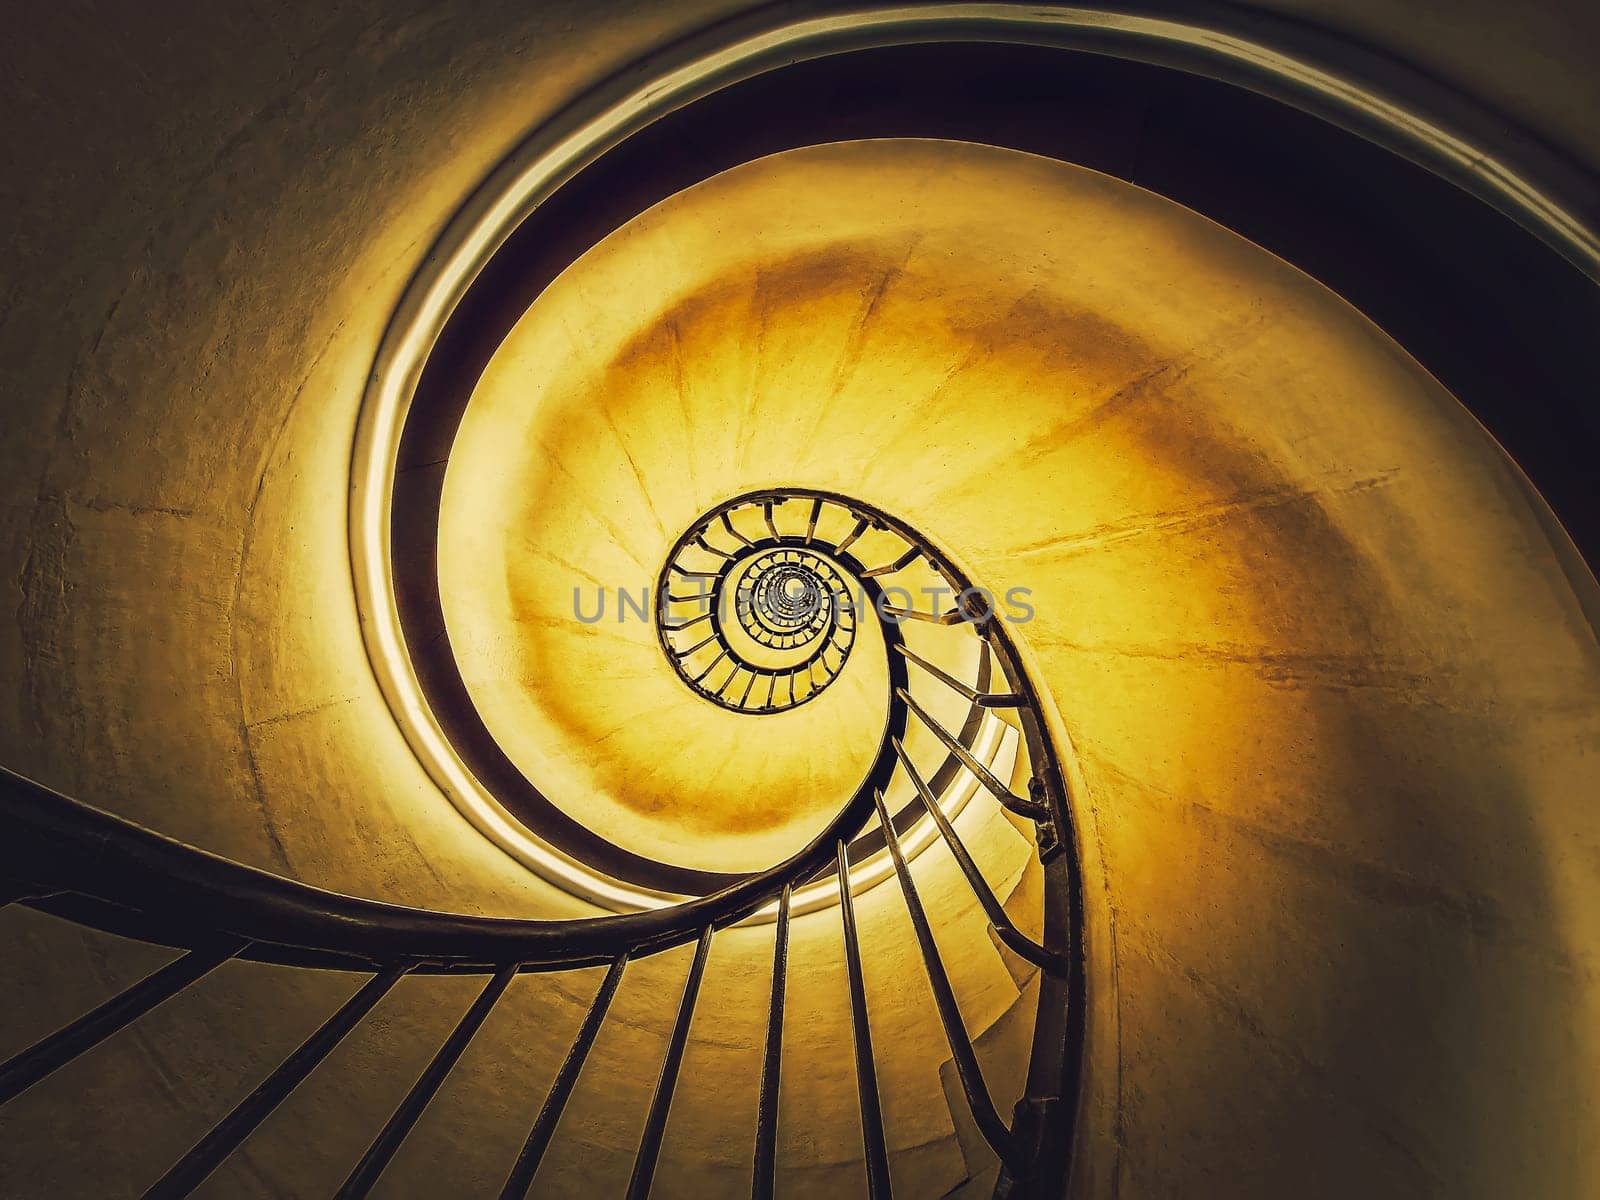 Spiral stairway abstract swirl hypnotising perspective. View downstairs to infinity circular stairs glowing in yellow light background